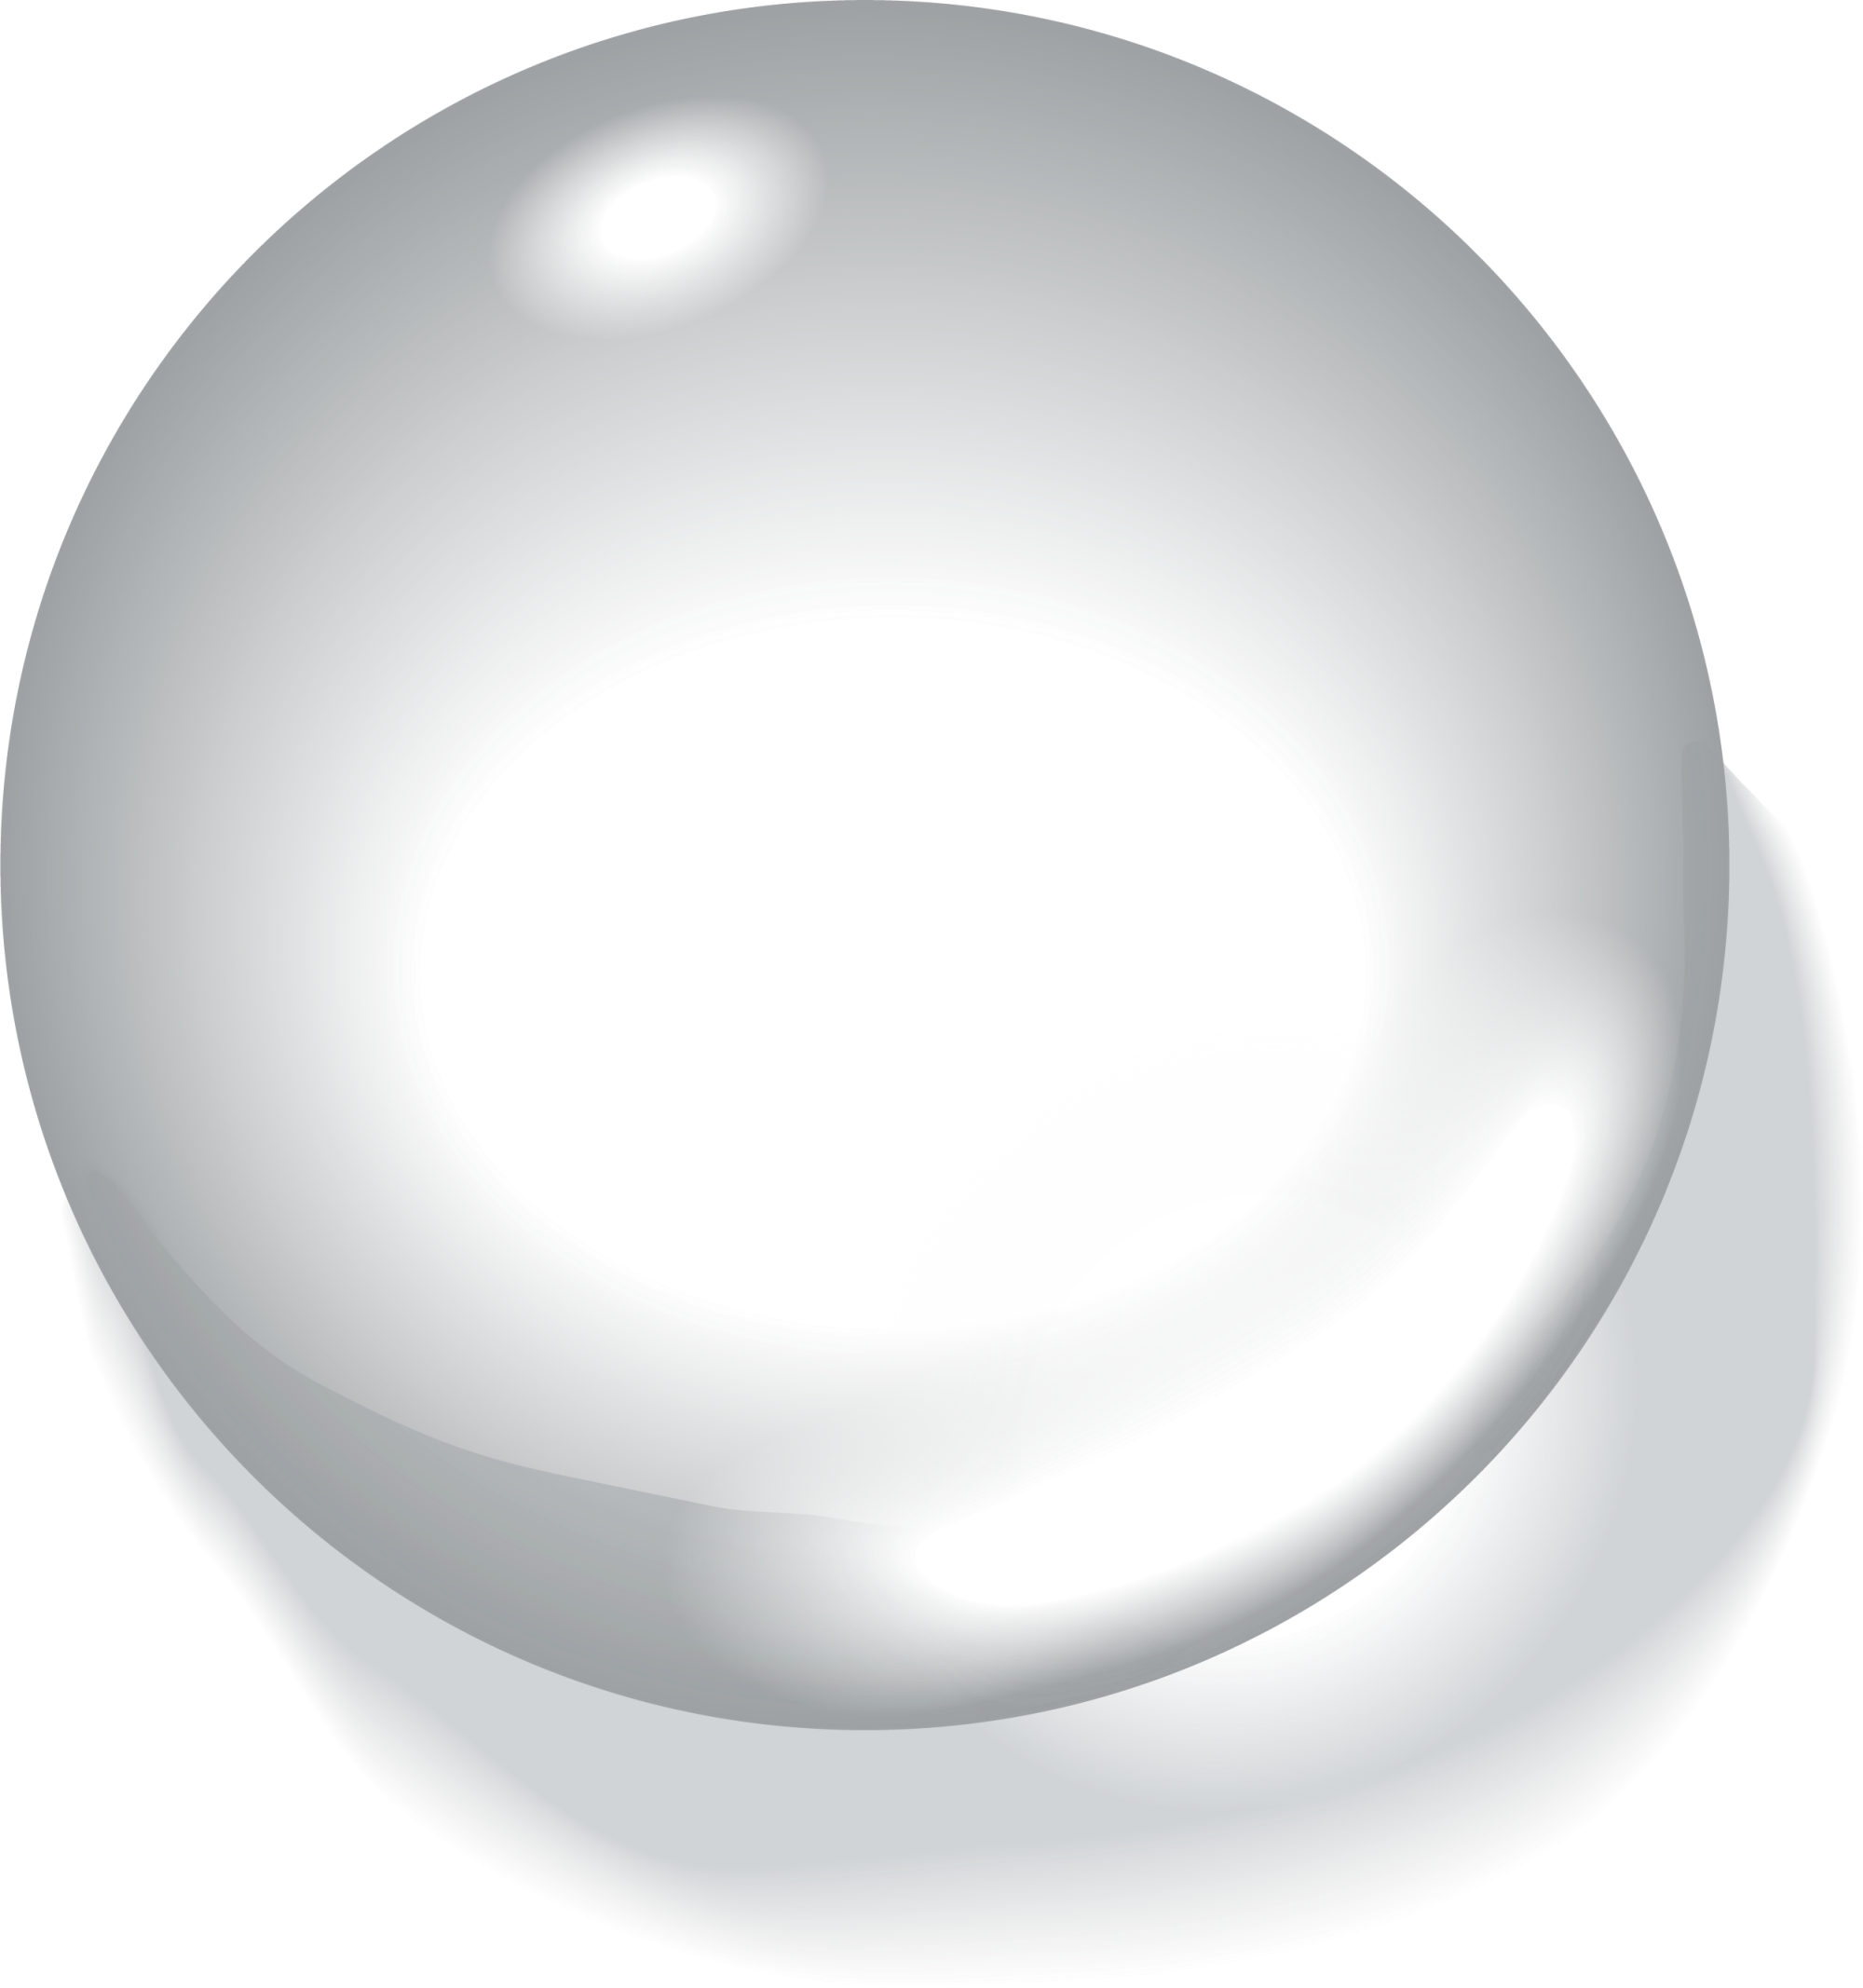 Oval Sphere White Drop Free Frame PNG Image